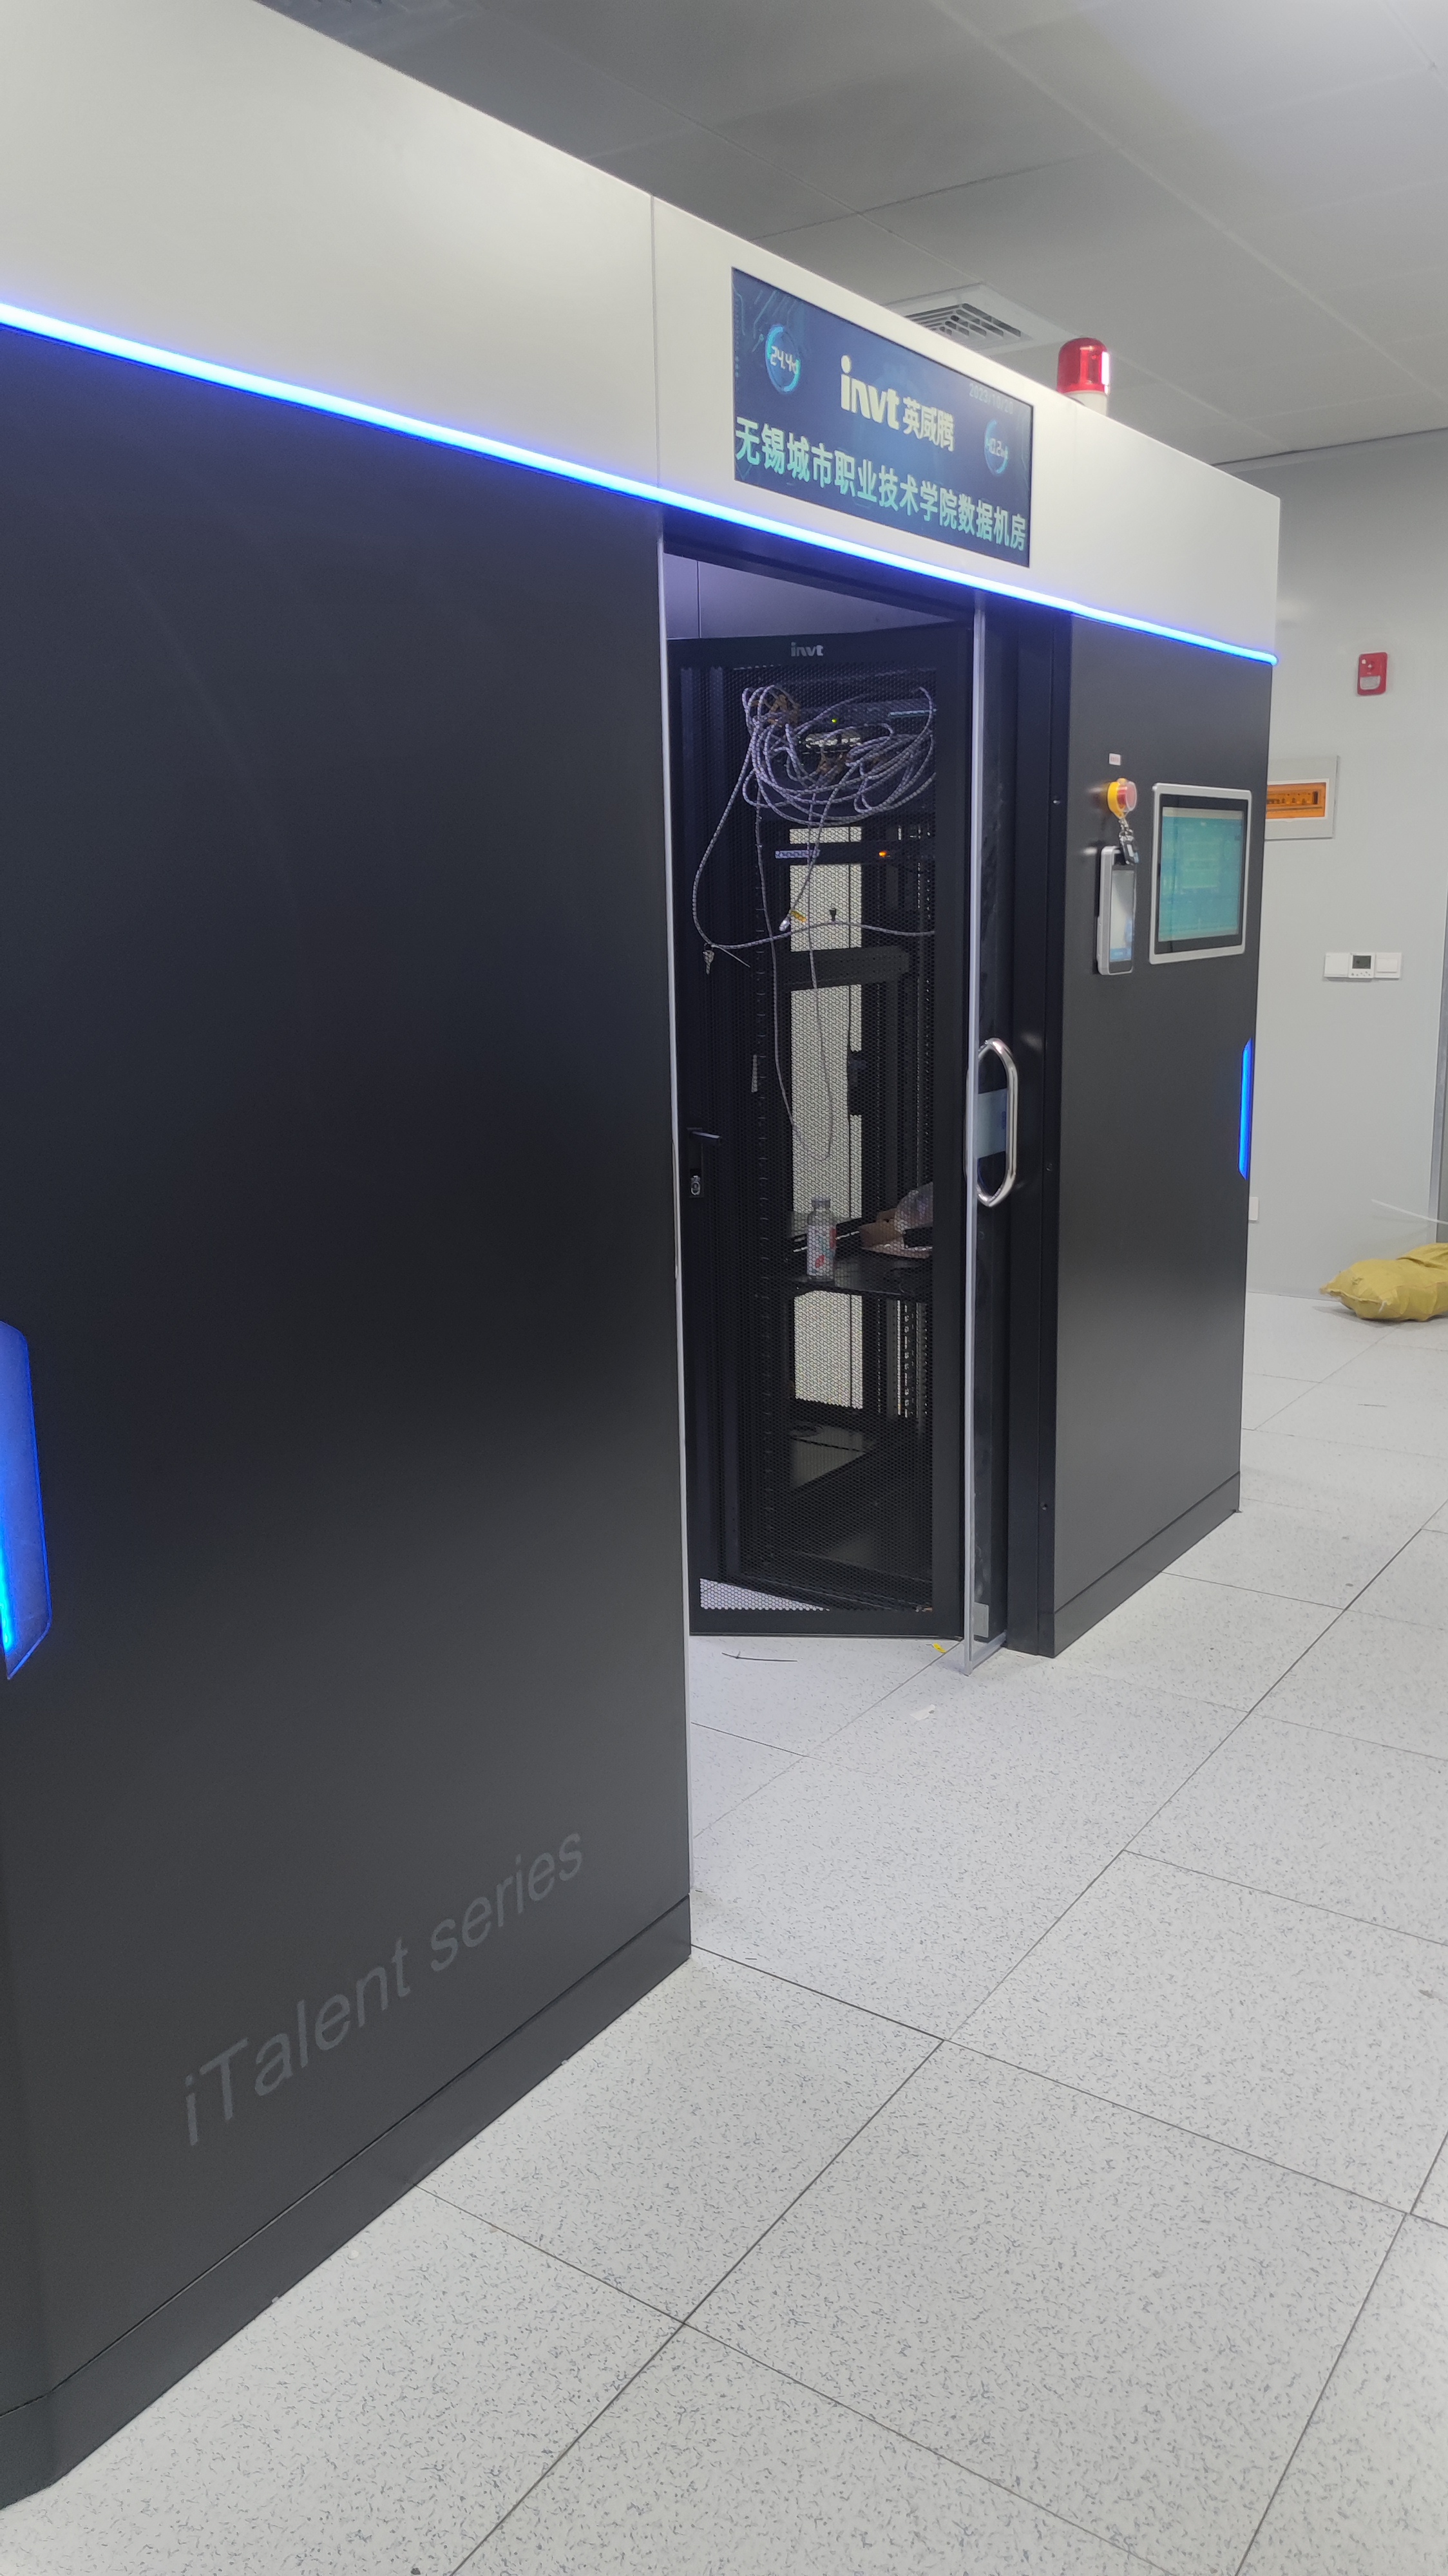 iTalent modular data center solution used in Wuxi City College of Vocational Technology project